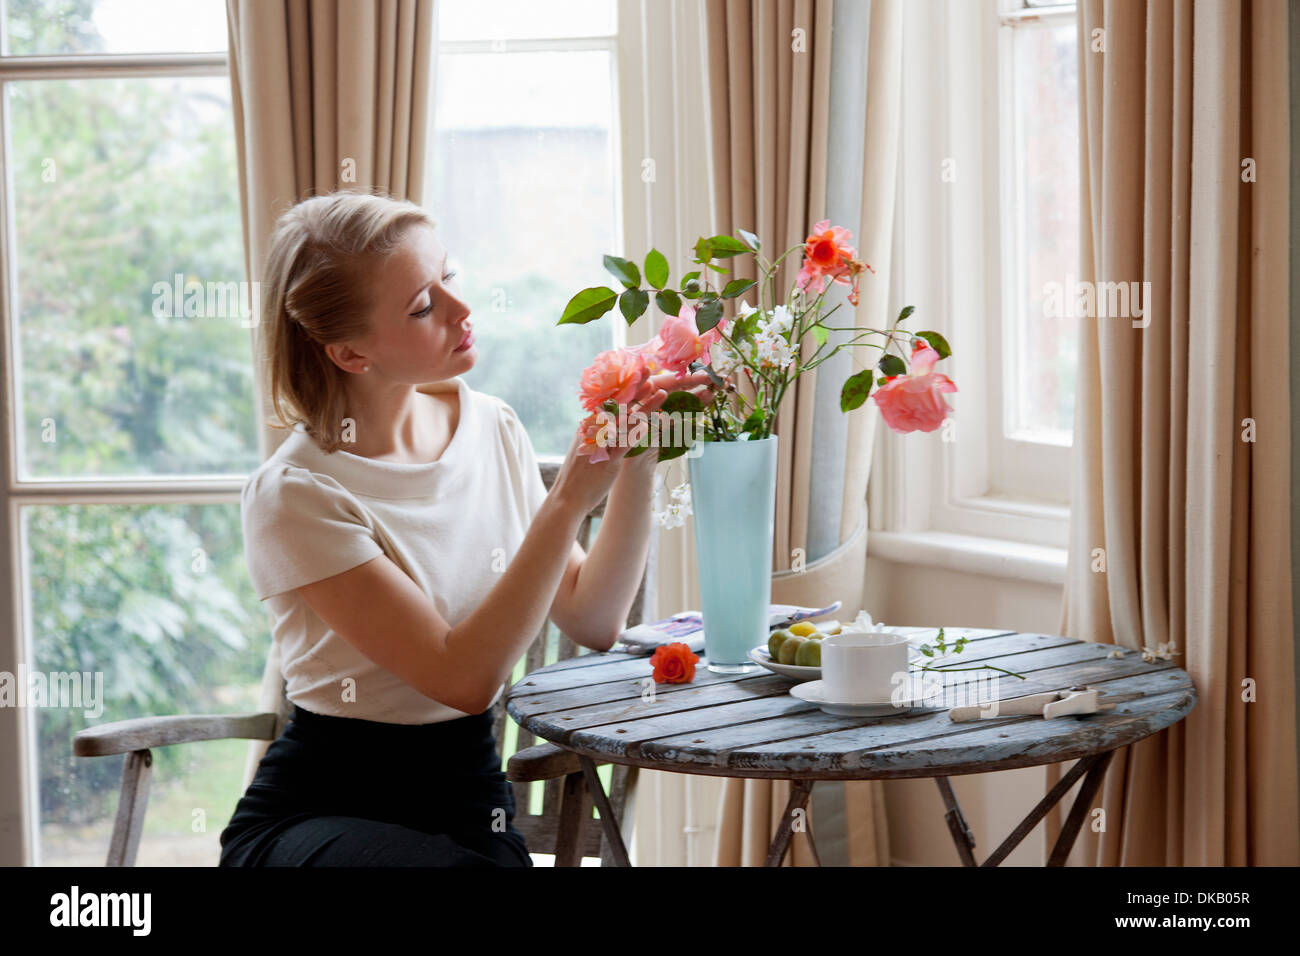 Woman arranging roses in vase Stock Photo